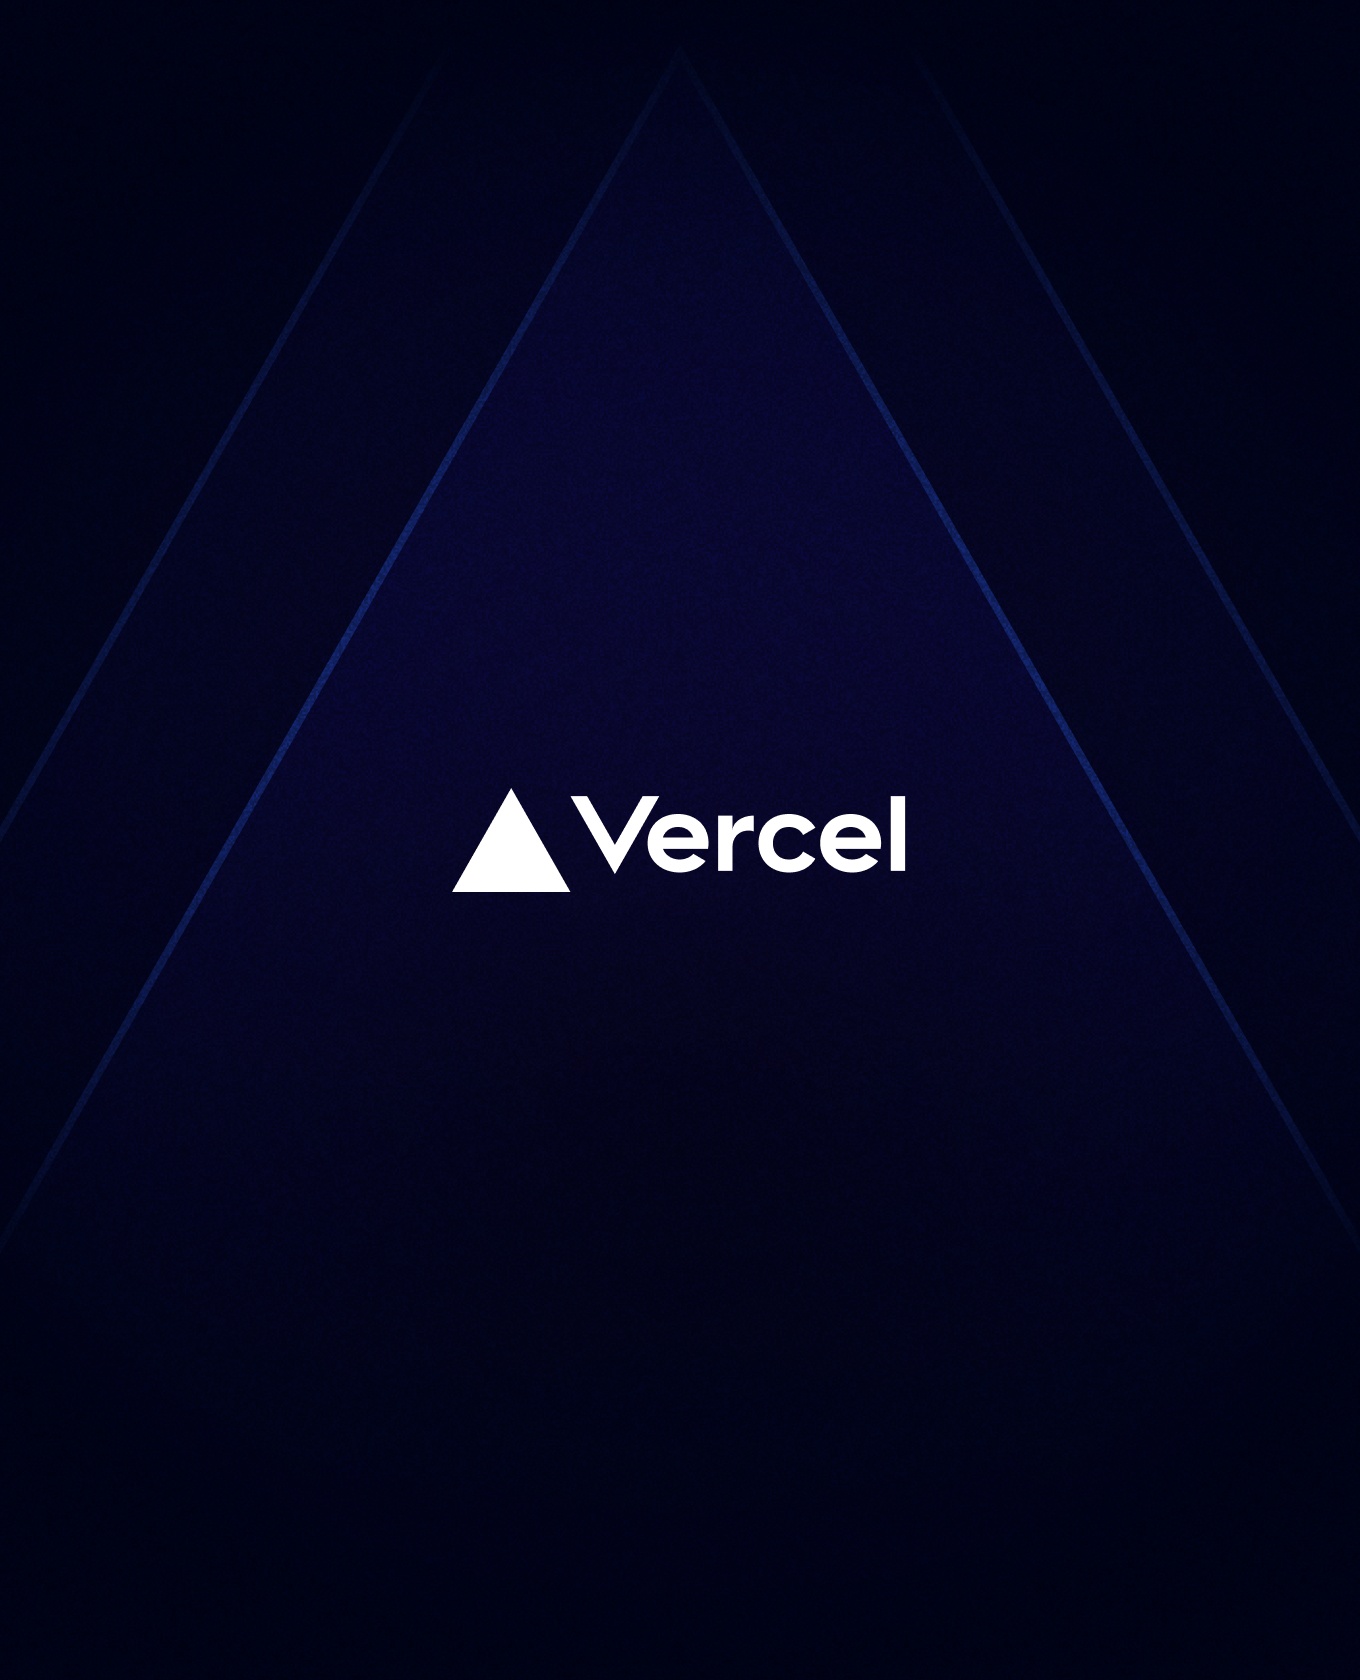 The Vercel wordmark against a dark but vibrant blue background composed of abstract and expanded shapes from the wordmark.